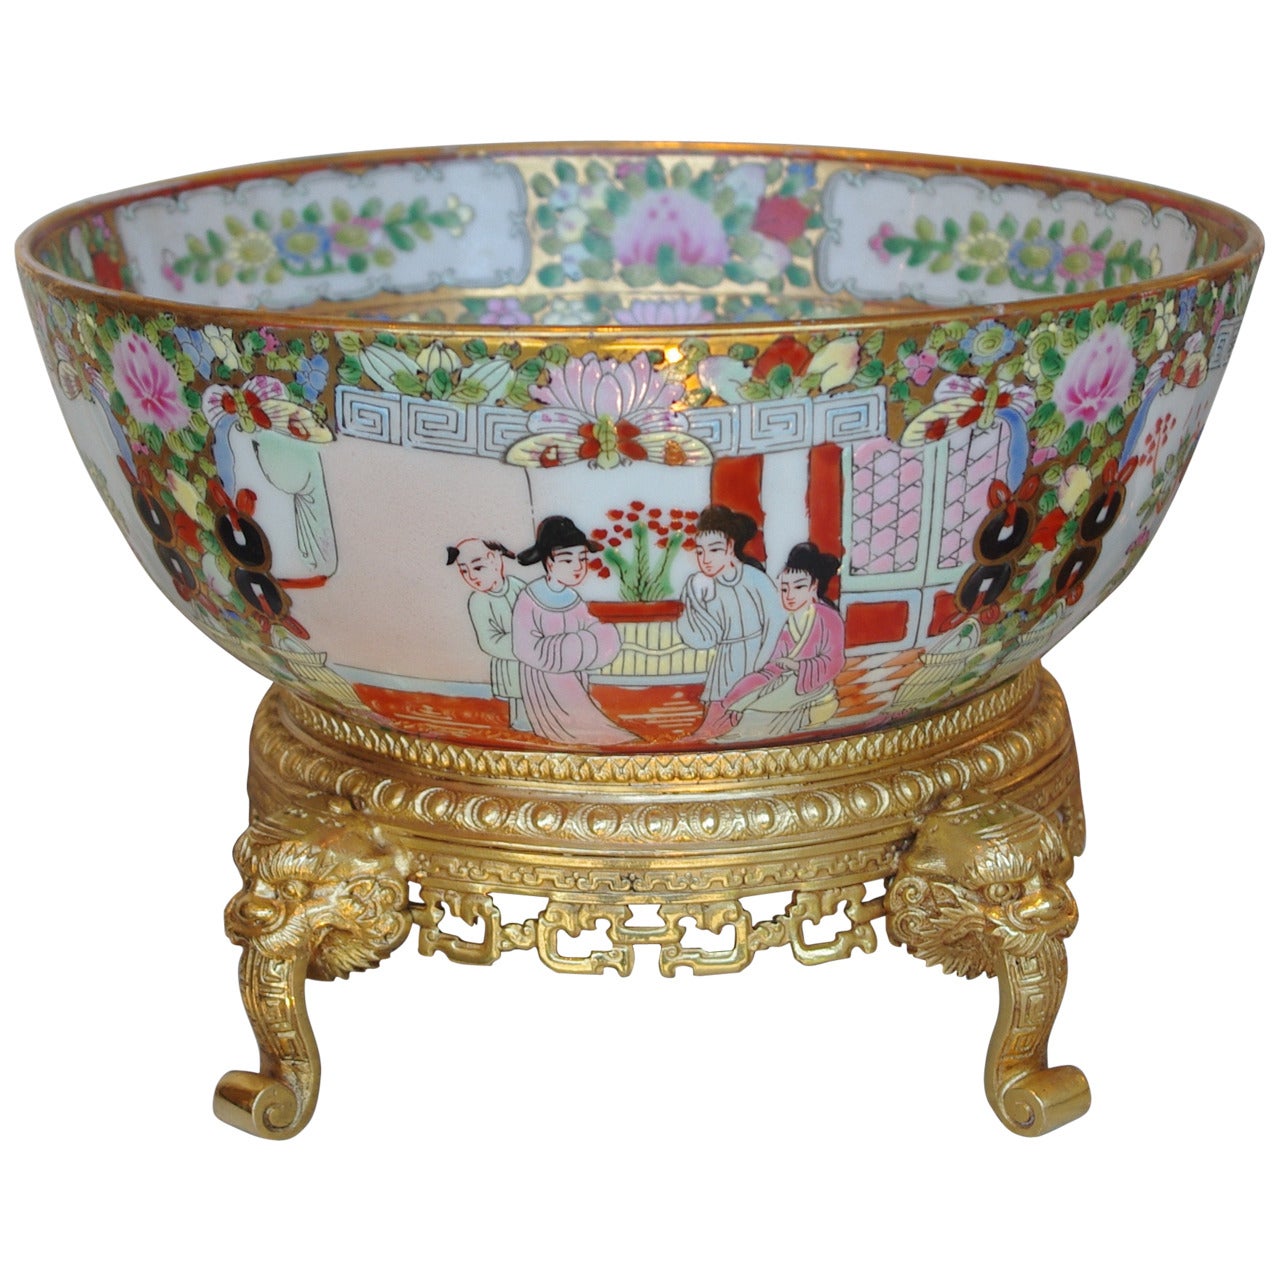 Canton Porcelain Punch Bowl Standing on Chiseled Gilt, circa 1880